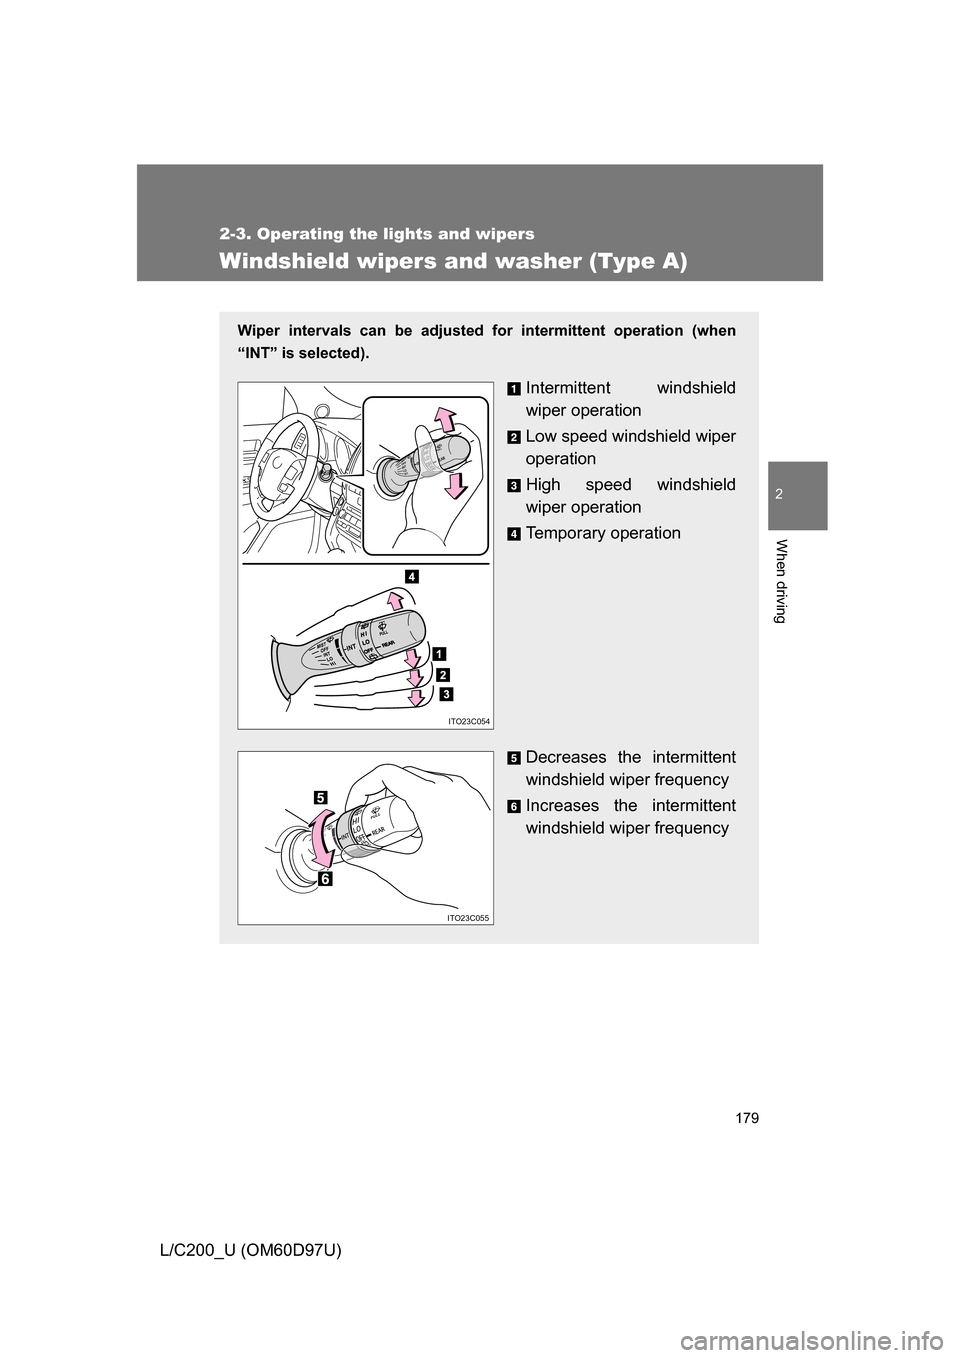 TOYOTA LAND CRUISER 2009 J200 Owners Manual 179
2-3. Operating the lights and wipers
2
When driving
L/C200_U (OM60D97U)
Windshield wipers and washer (Type A)
Wiper intervals can be adjusted for intermittent operation (when
“INT” is selected